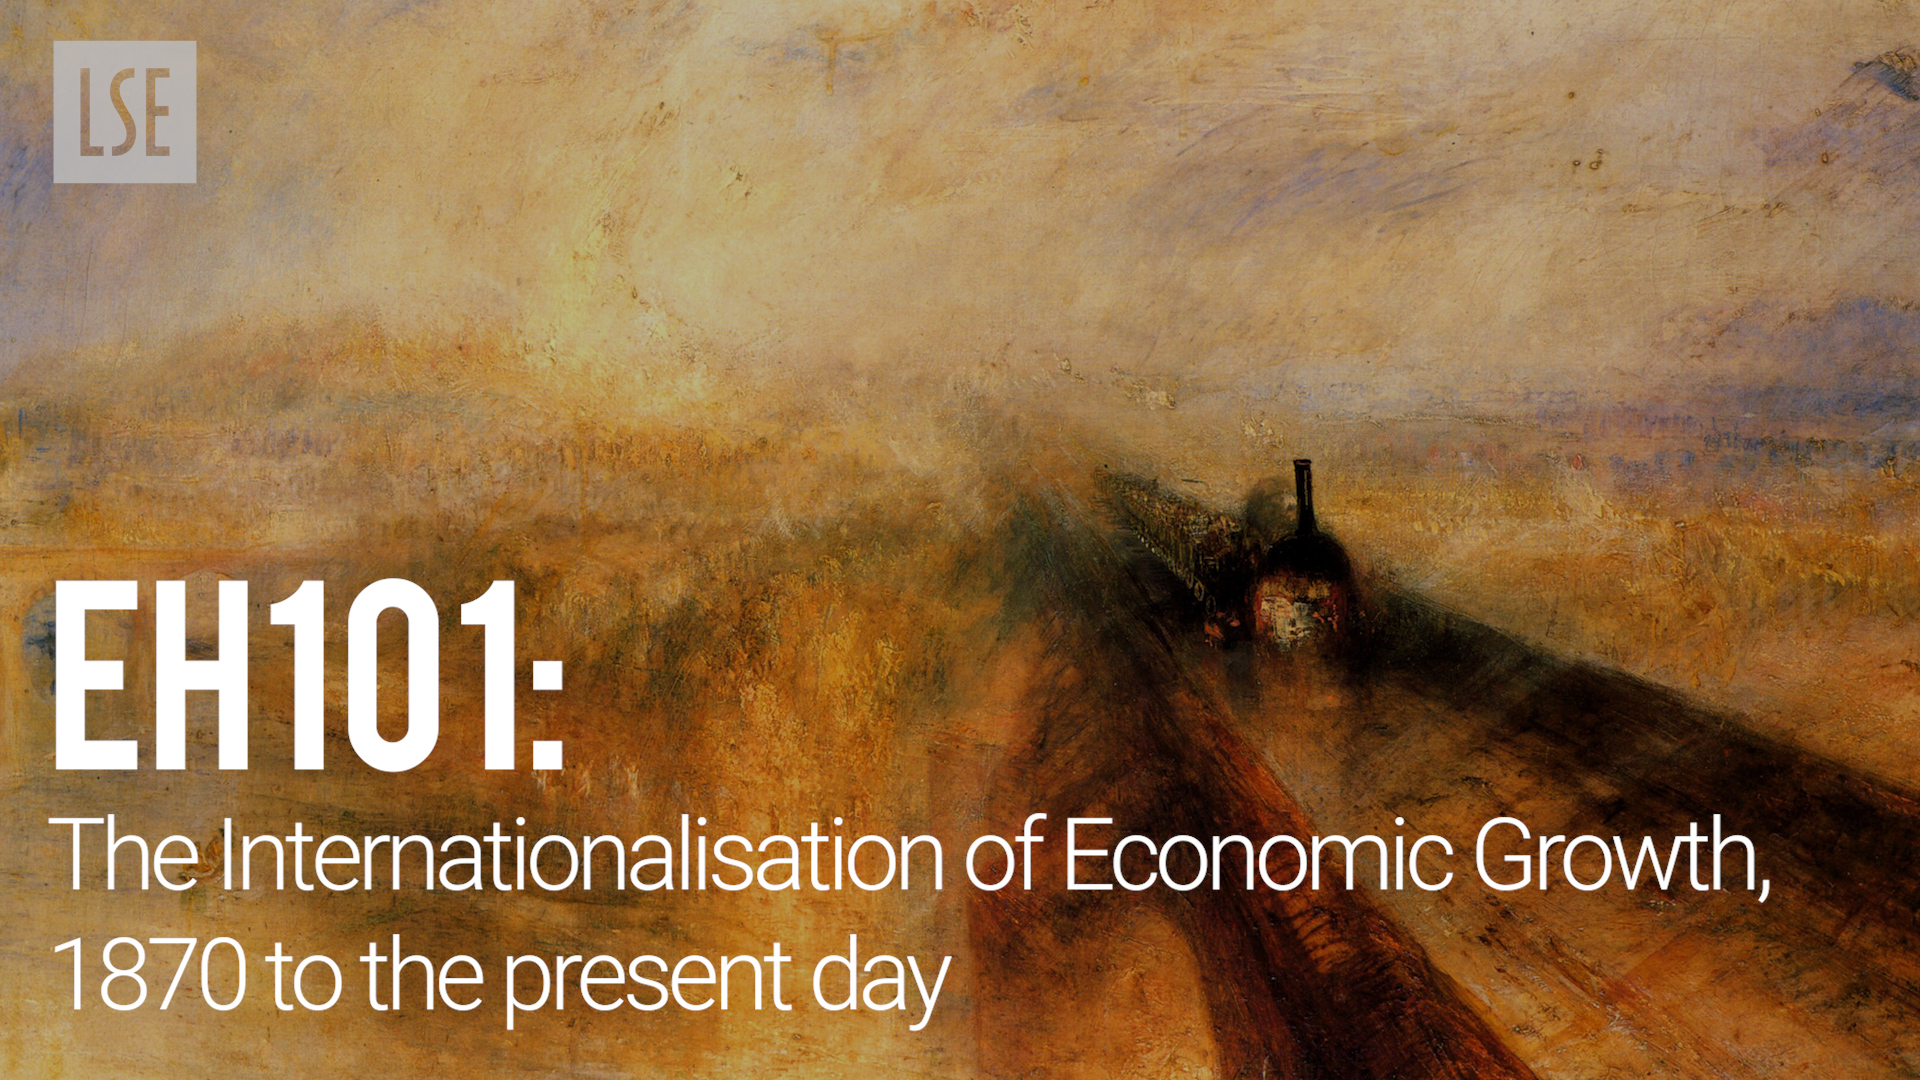 EH101 - The Internationalisation of Economic Growth, 1870 to the present day, by Professor Chris Minns and Dr Eric Schneider